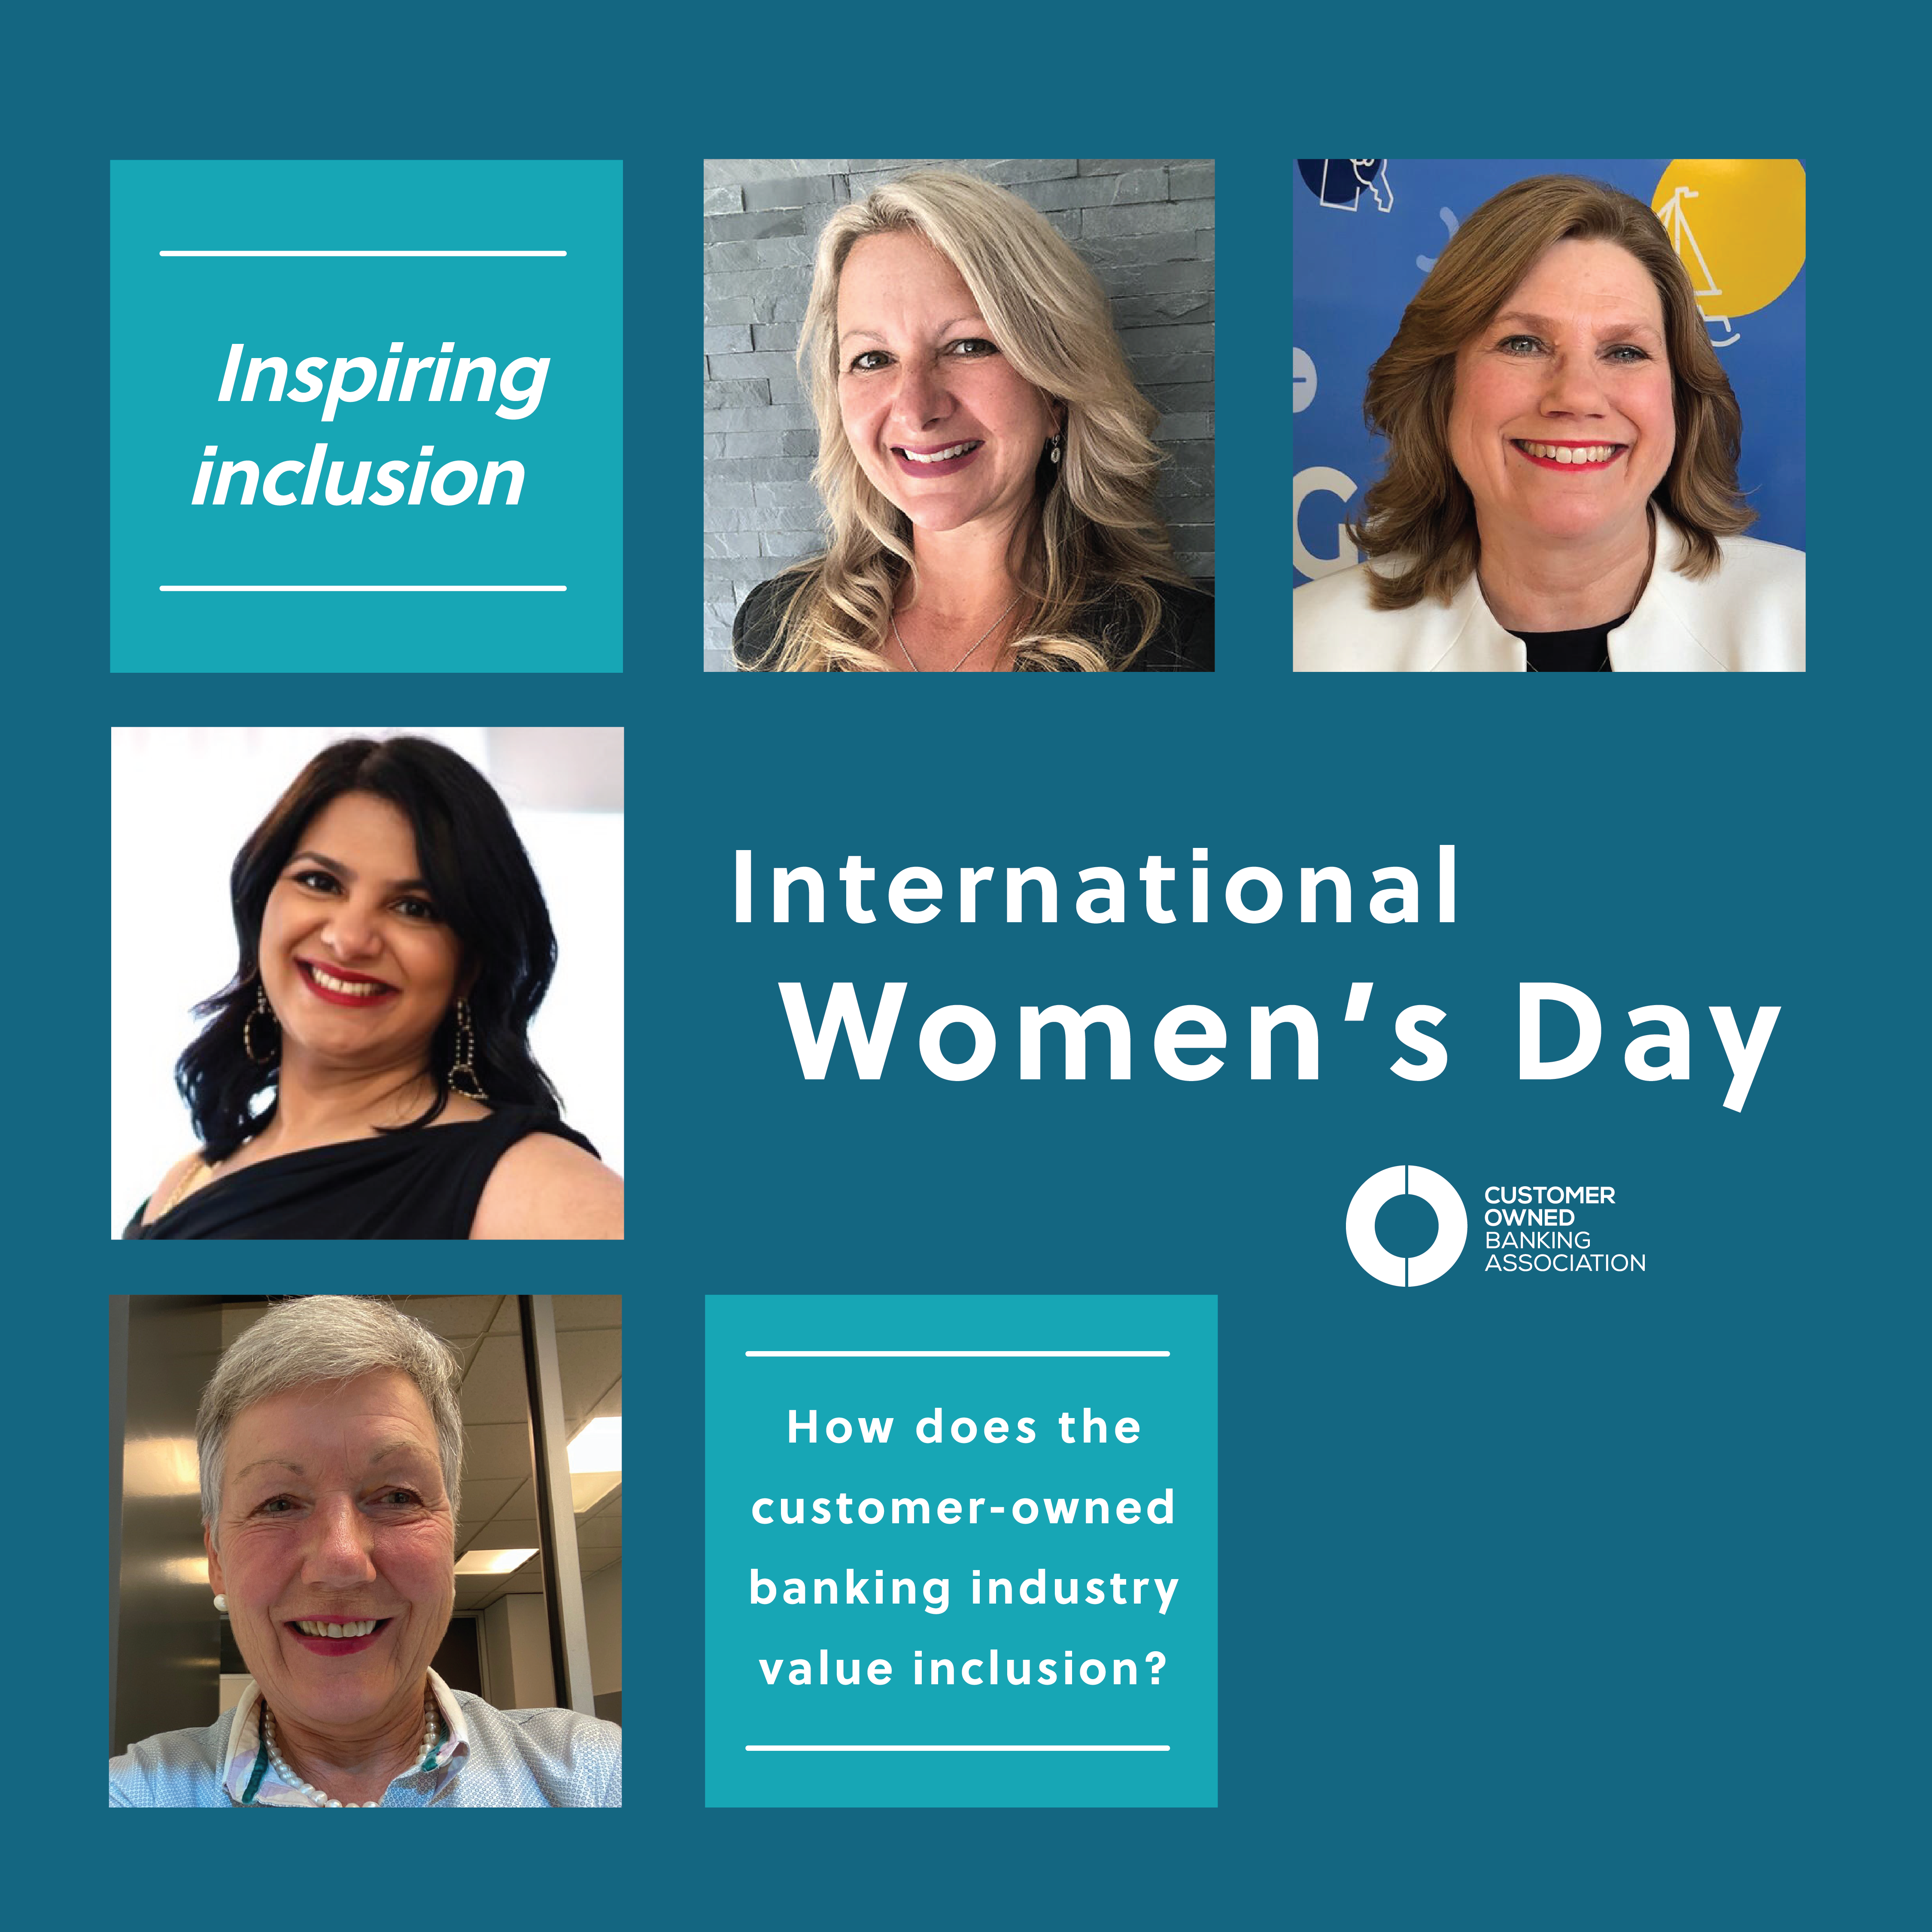 International Women’s Day: Four female leaders share their thoughts on inspiring inclusion in the workplace